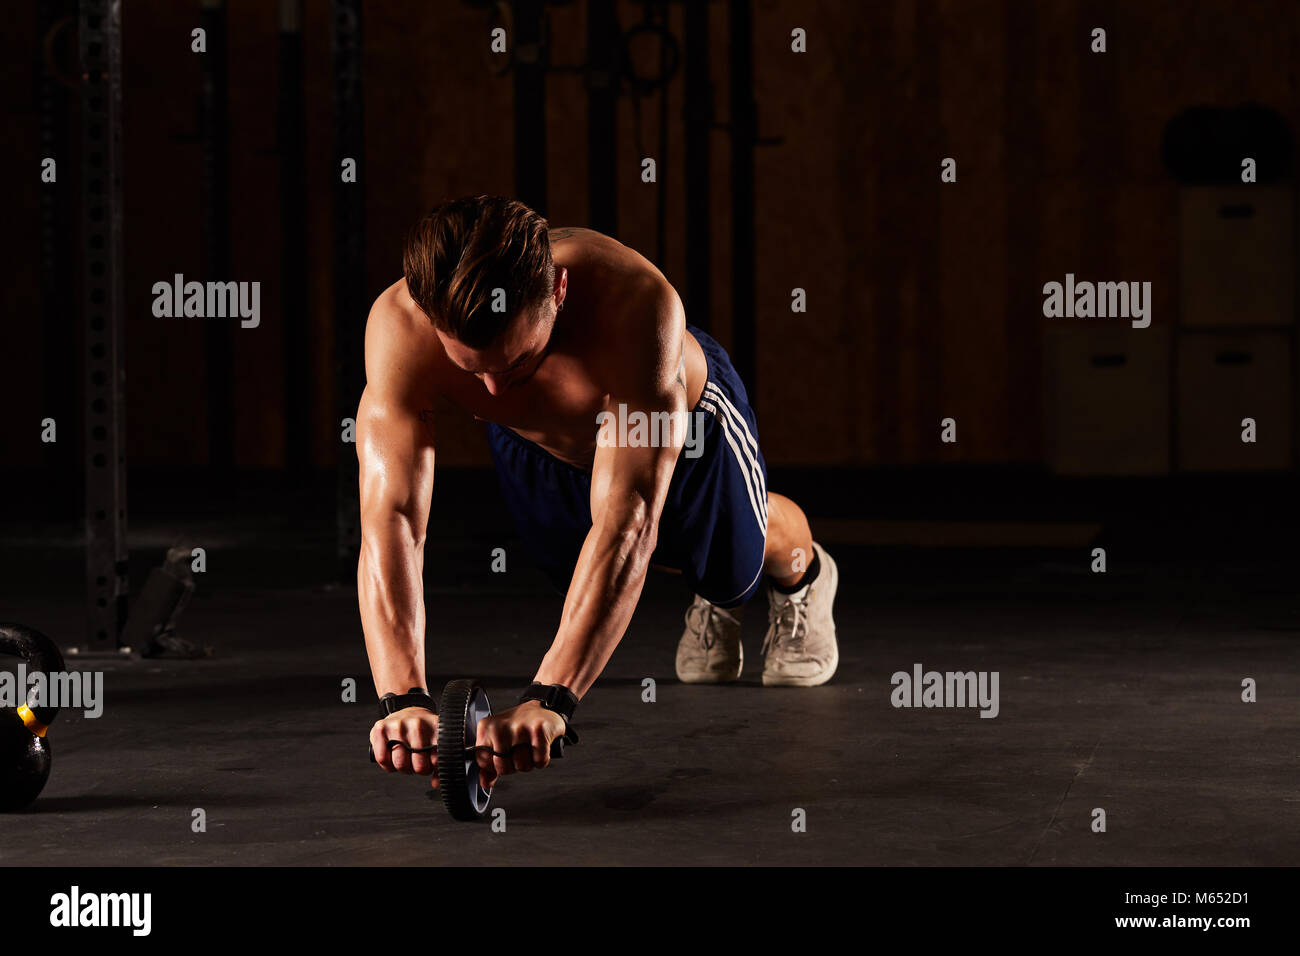 Crossfit workout Stock Photo